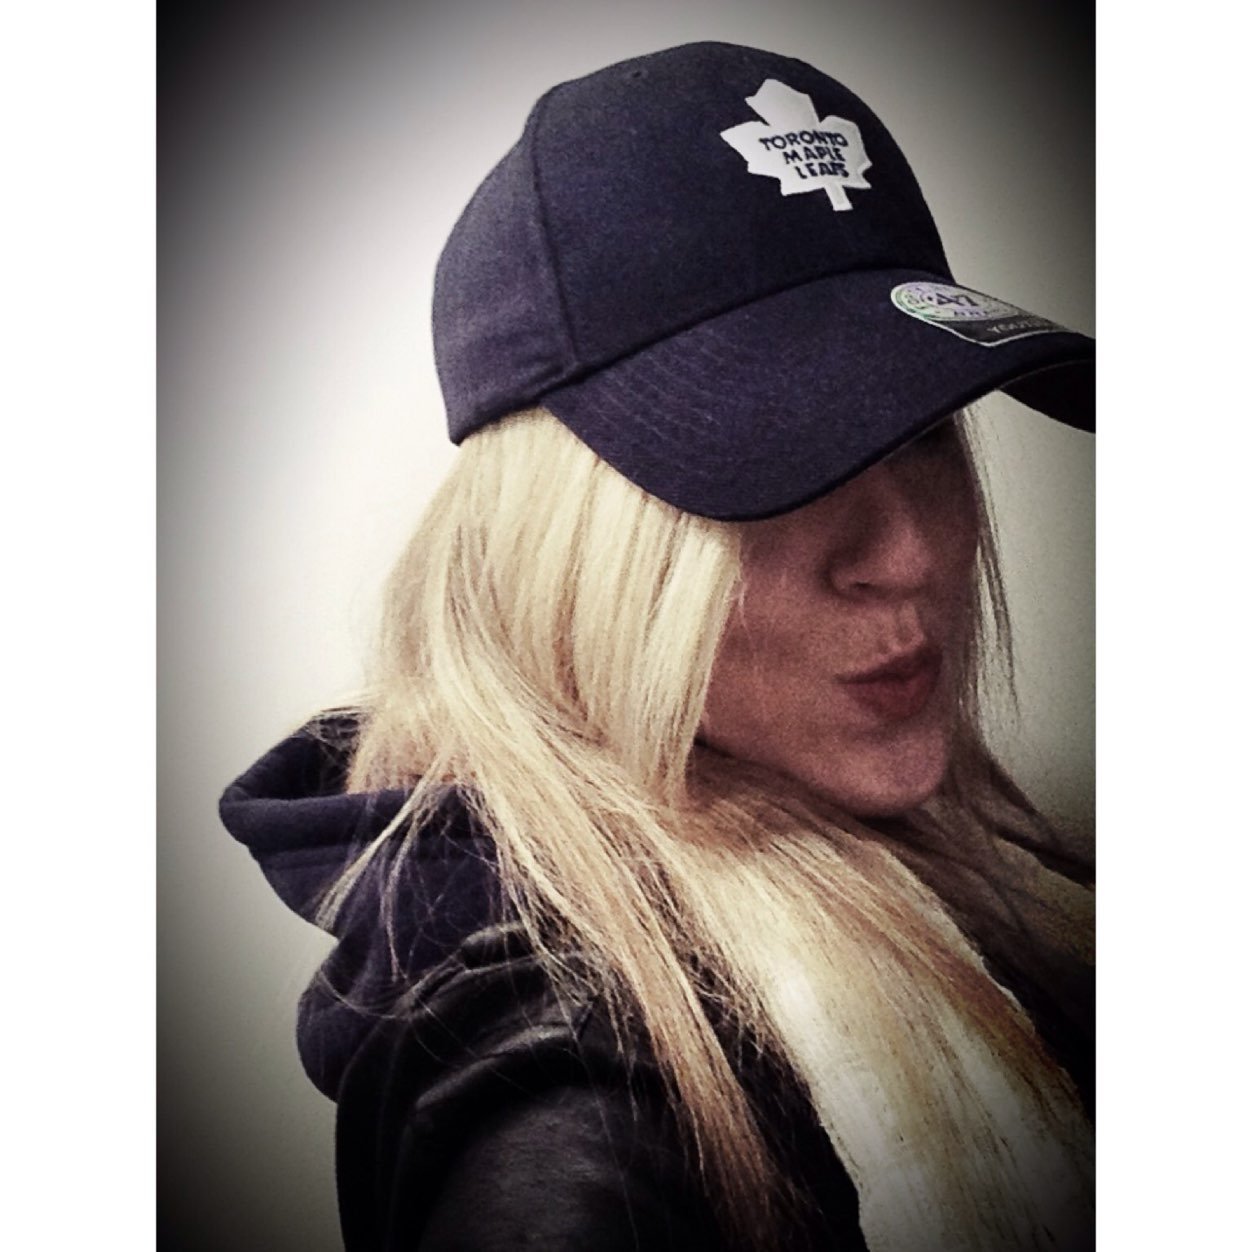 My girlfriends hated me tweeting about hockey so much, so I had to make a new twitter! Toronto girl.Hockey lover.#TMLKendra #LeafsNation #TMLTalk #goleafsgo